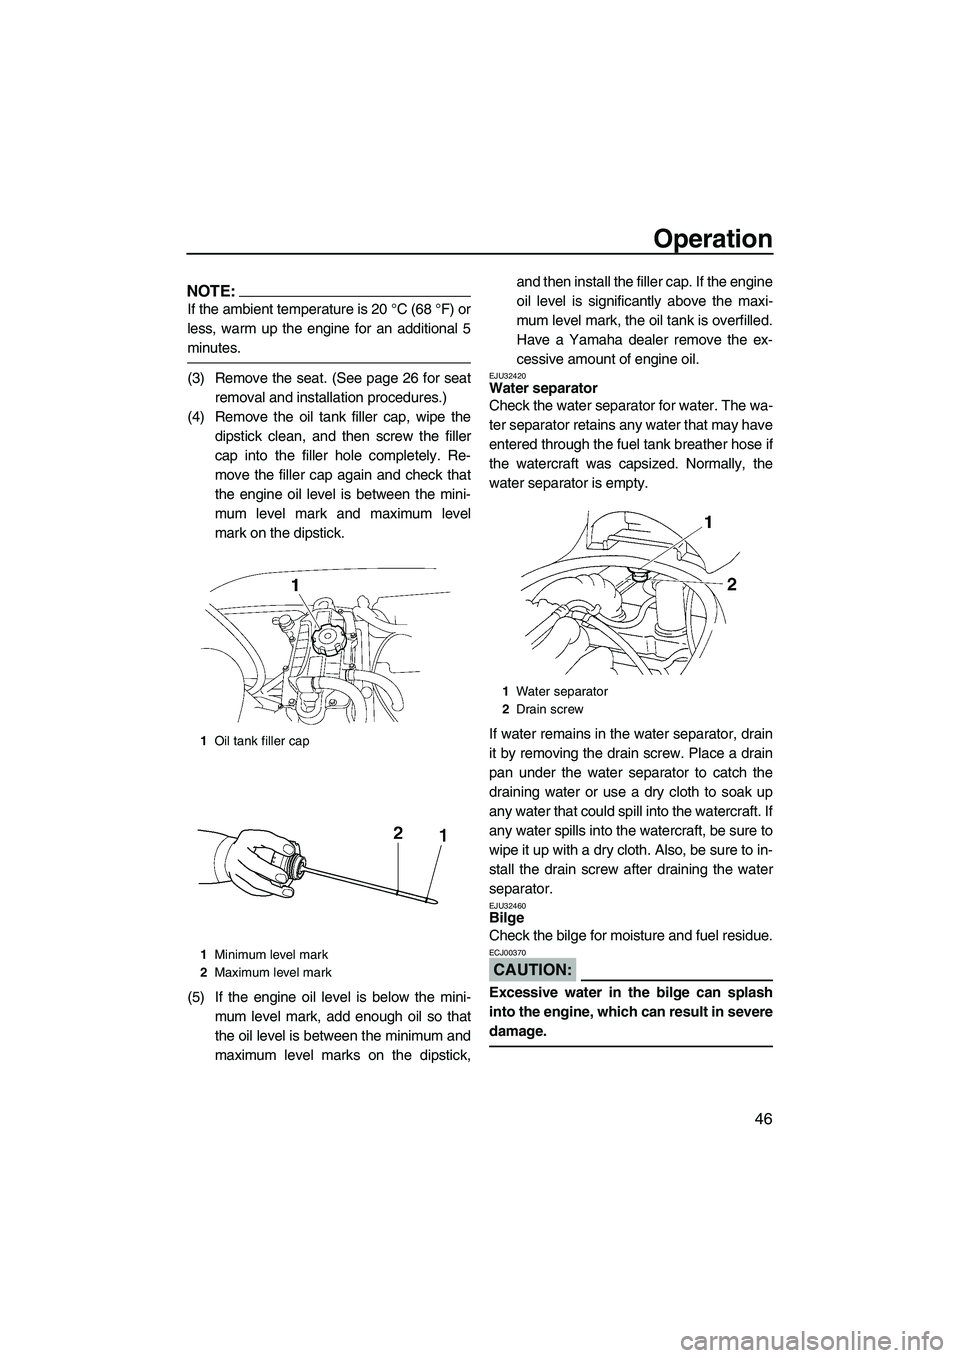 YAMAHA VX CRUISER 2007  Owners Manual Operation
46
NOTE:
If the ambient temperature is 20 °C (68 °F) or
less, warm up the engine for an additional 5
minutes.
(3) Remove the seat. (See page 26 for seat
removal and installation procedures